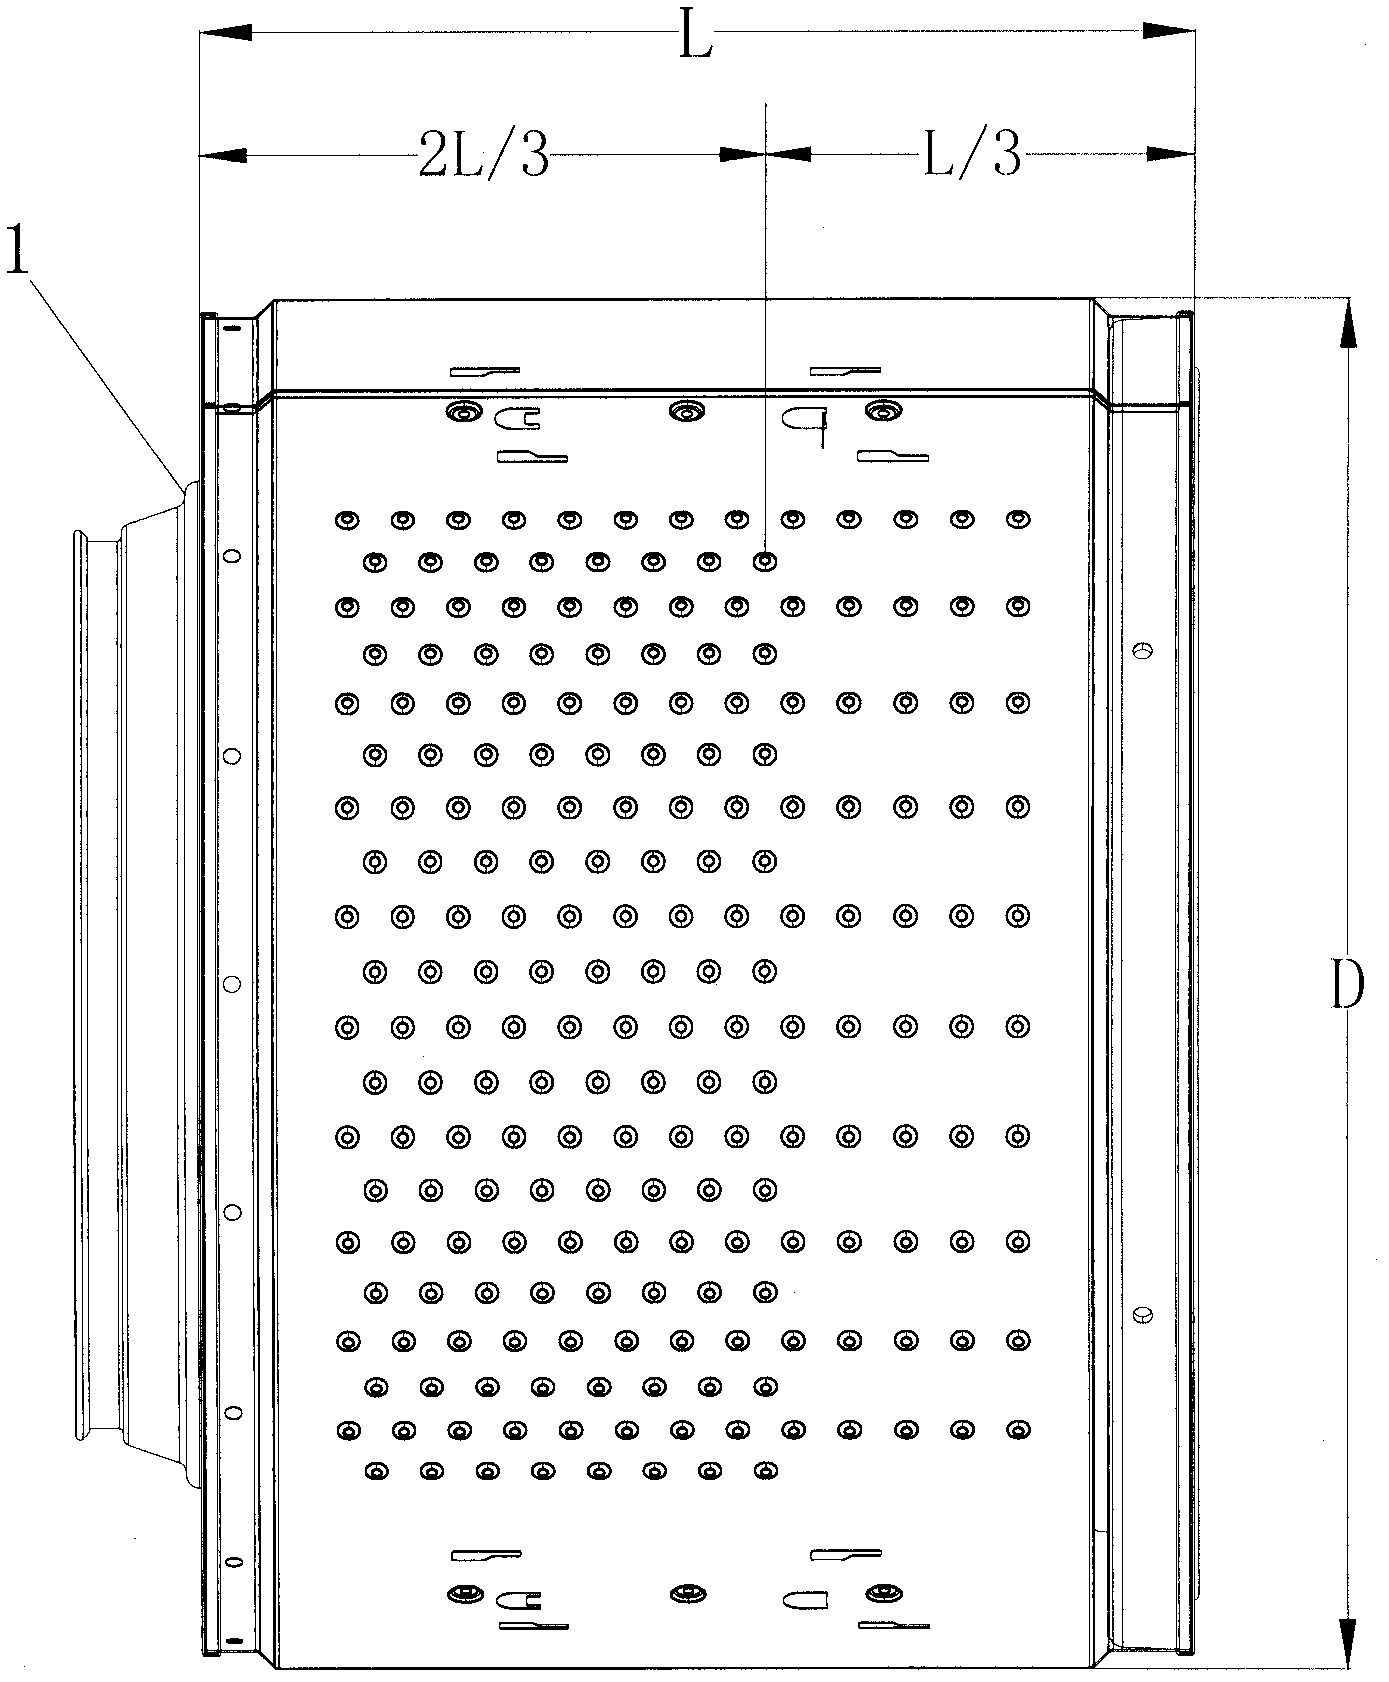 An inner and outer drum structure of a washing machine with drying function